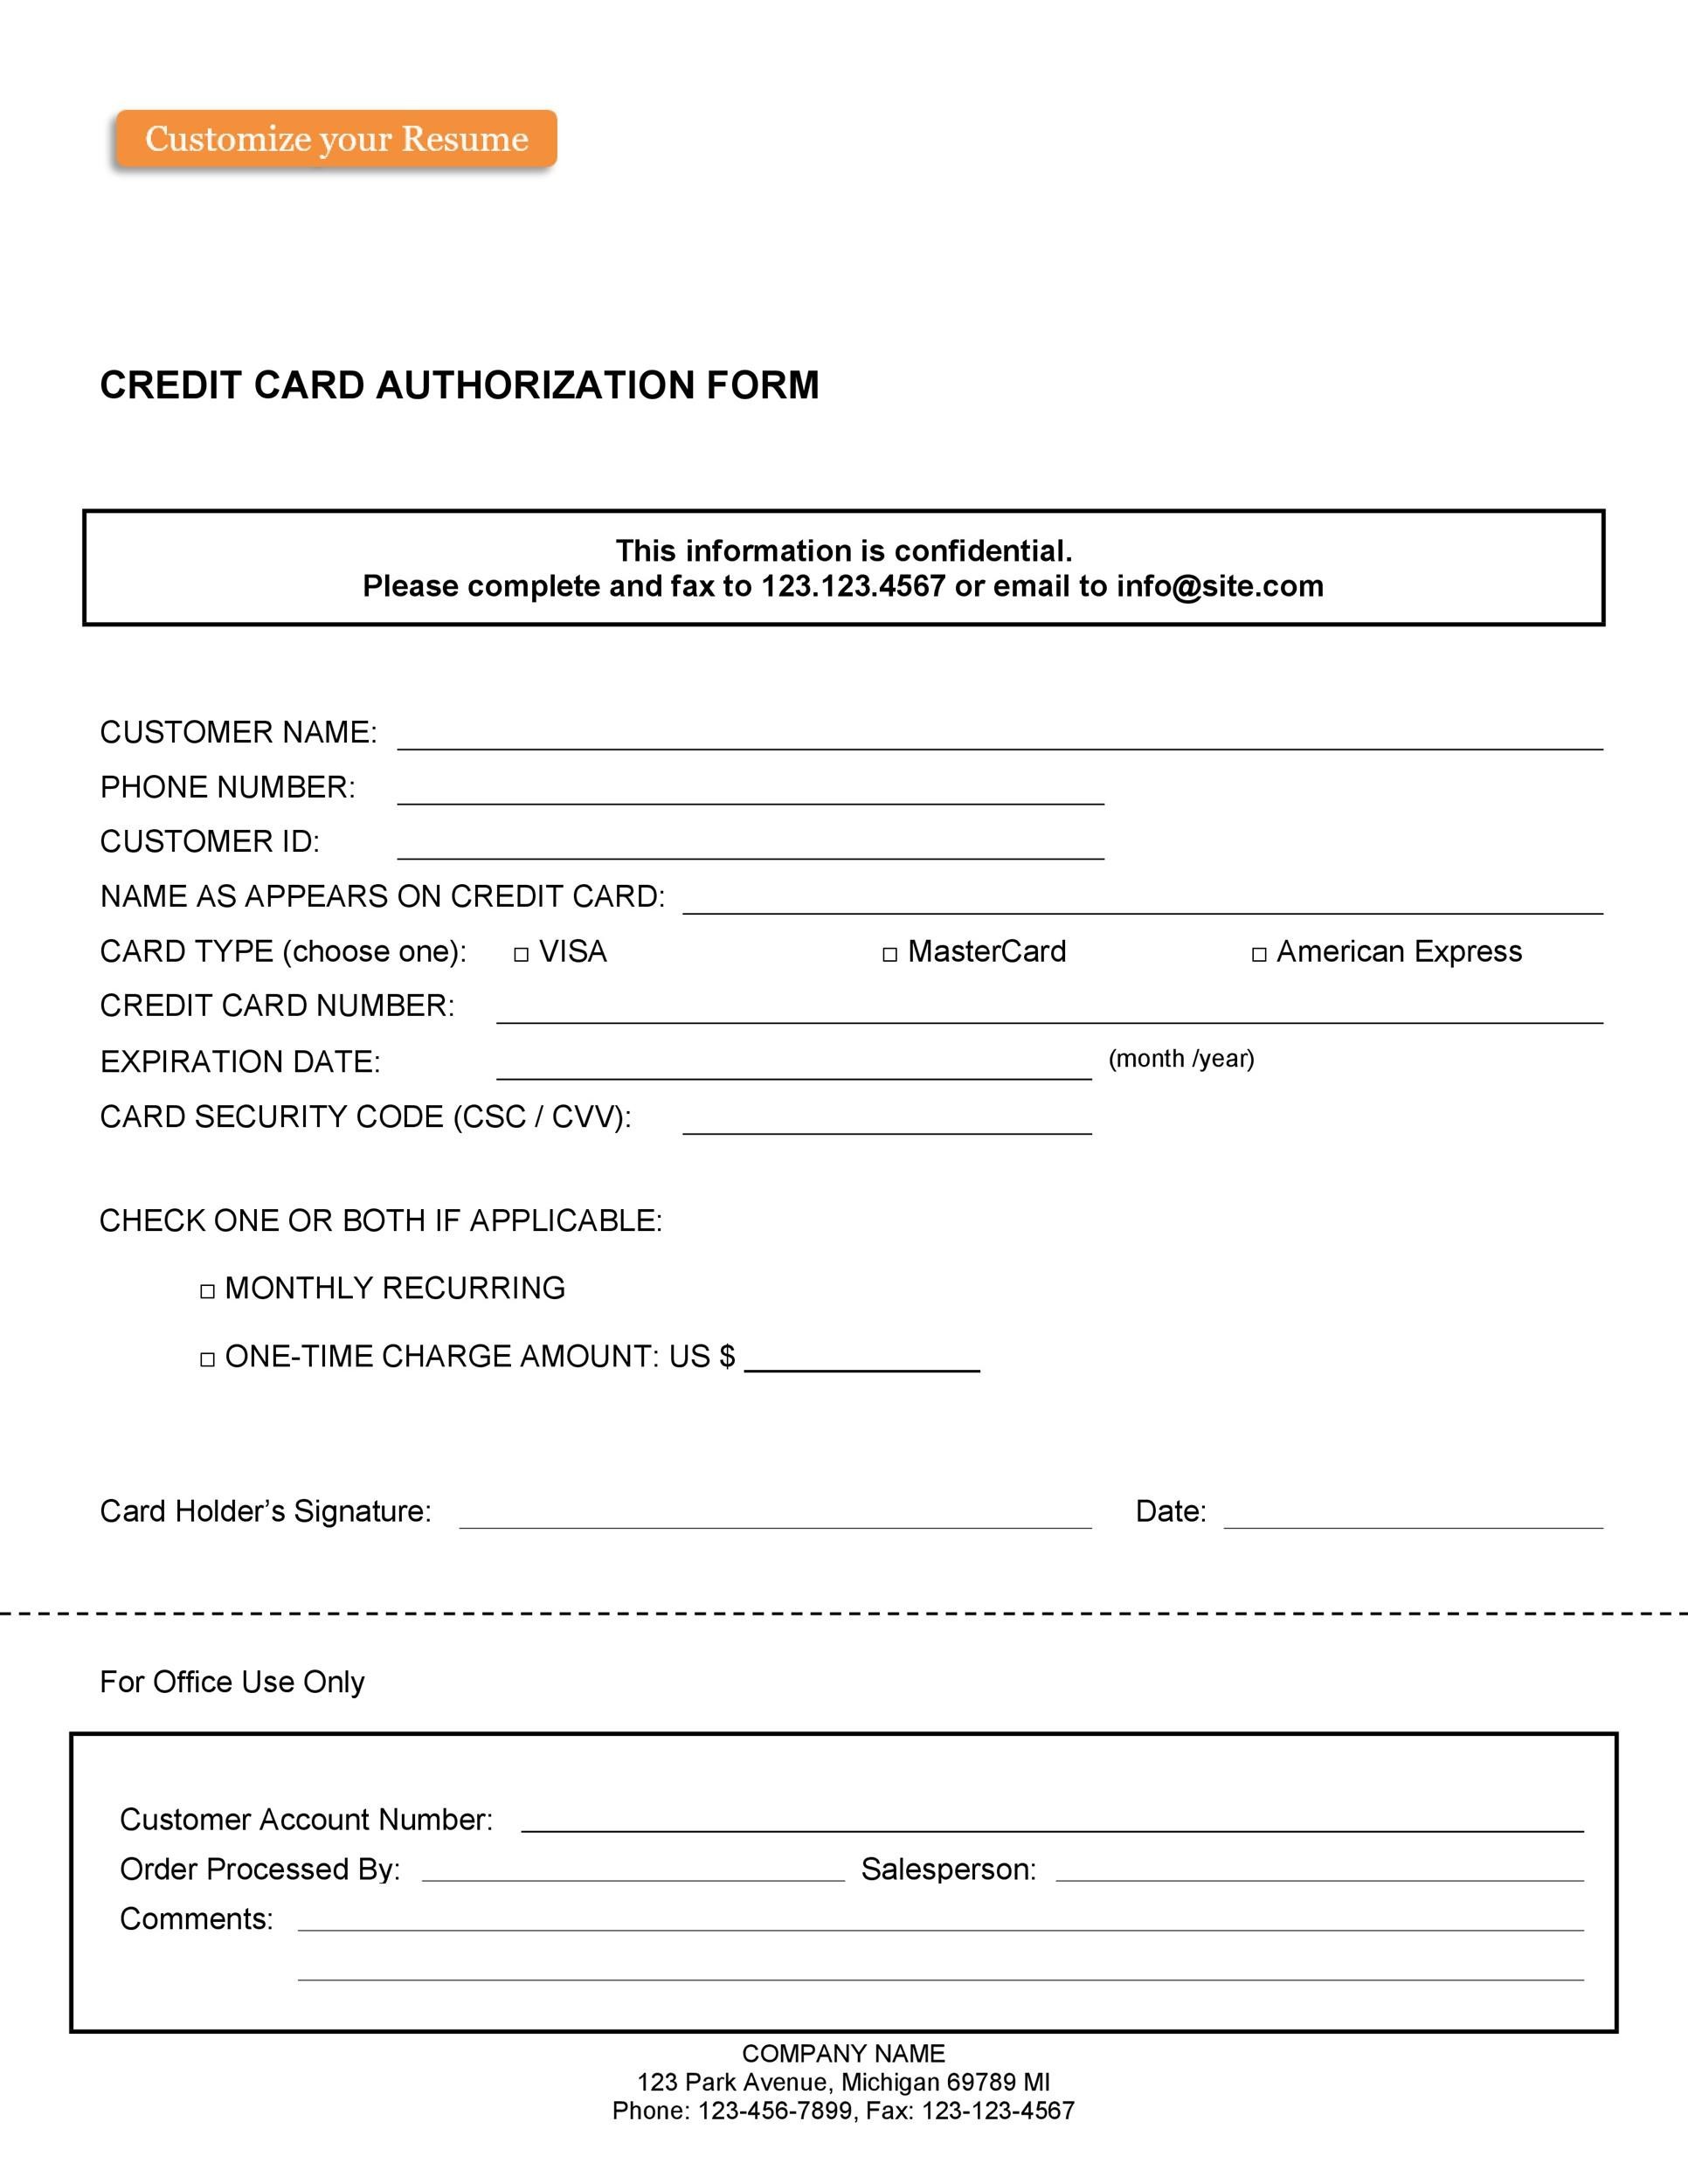 Credit Card Authorization Form Template Pertaining To Order Form With Credit Card Template